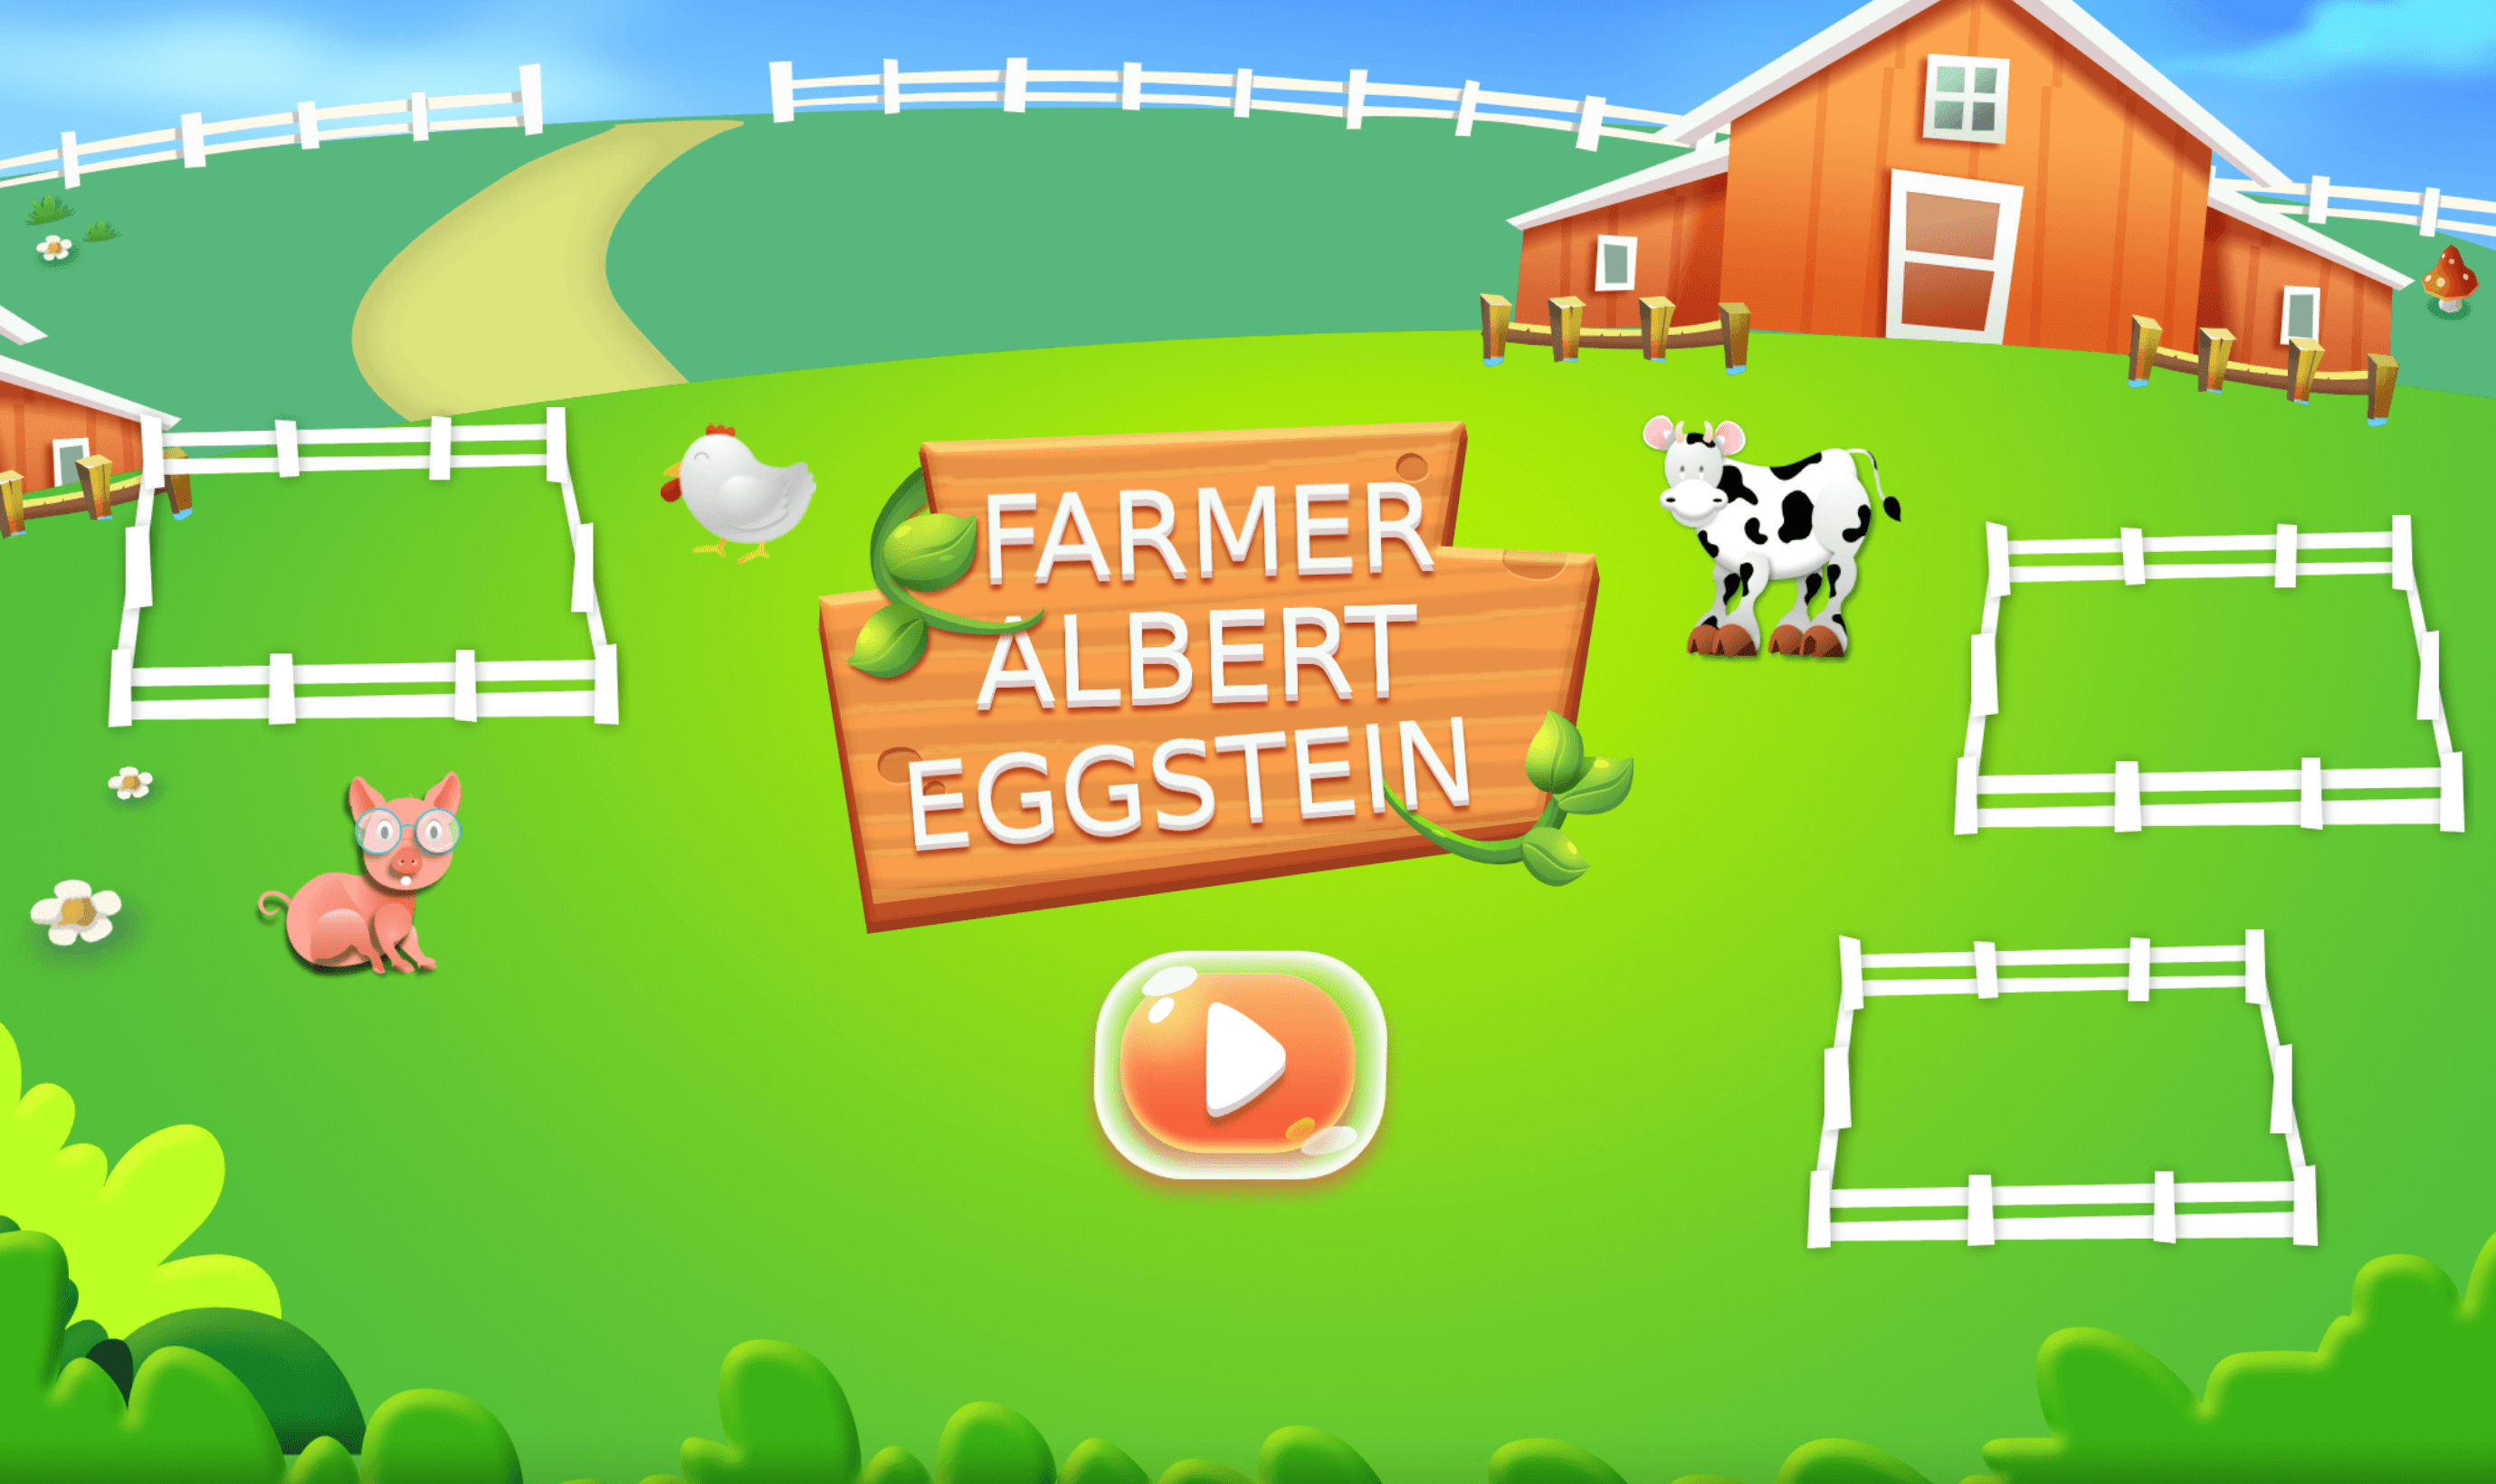 A game title screen featuring a farm background and a play button.